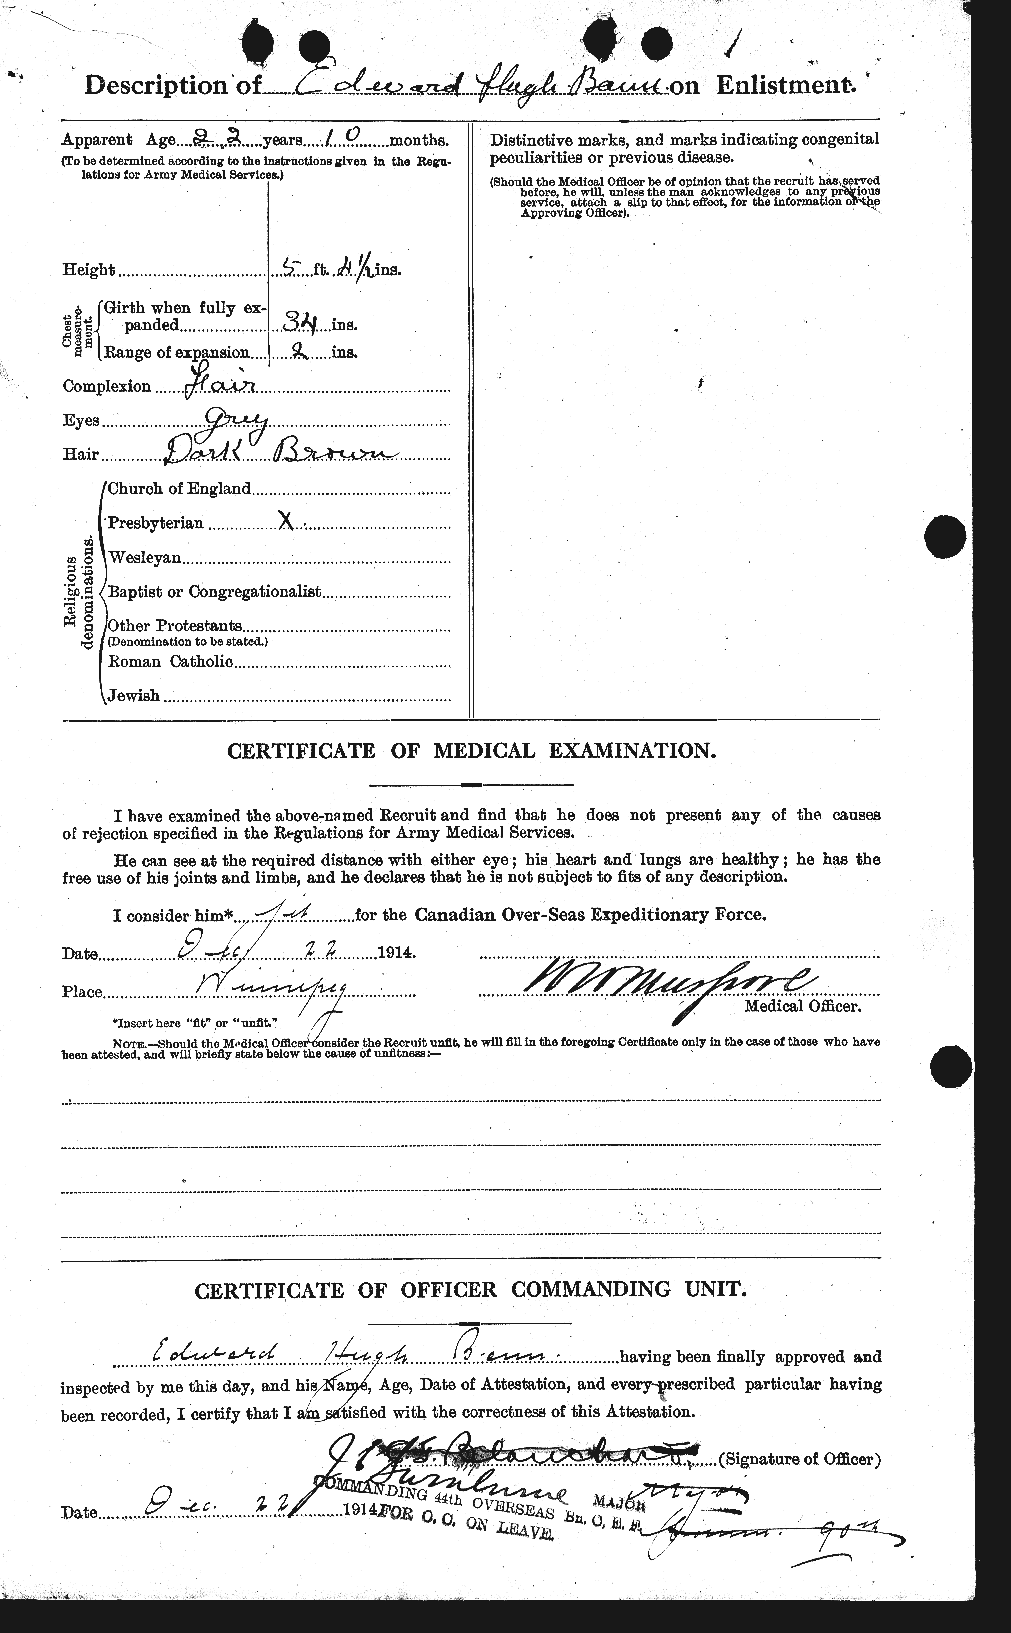 Personnel Records of the First World War - CEF 224911b